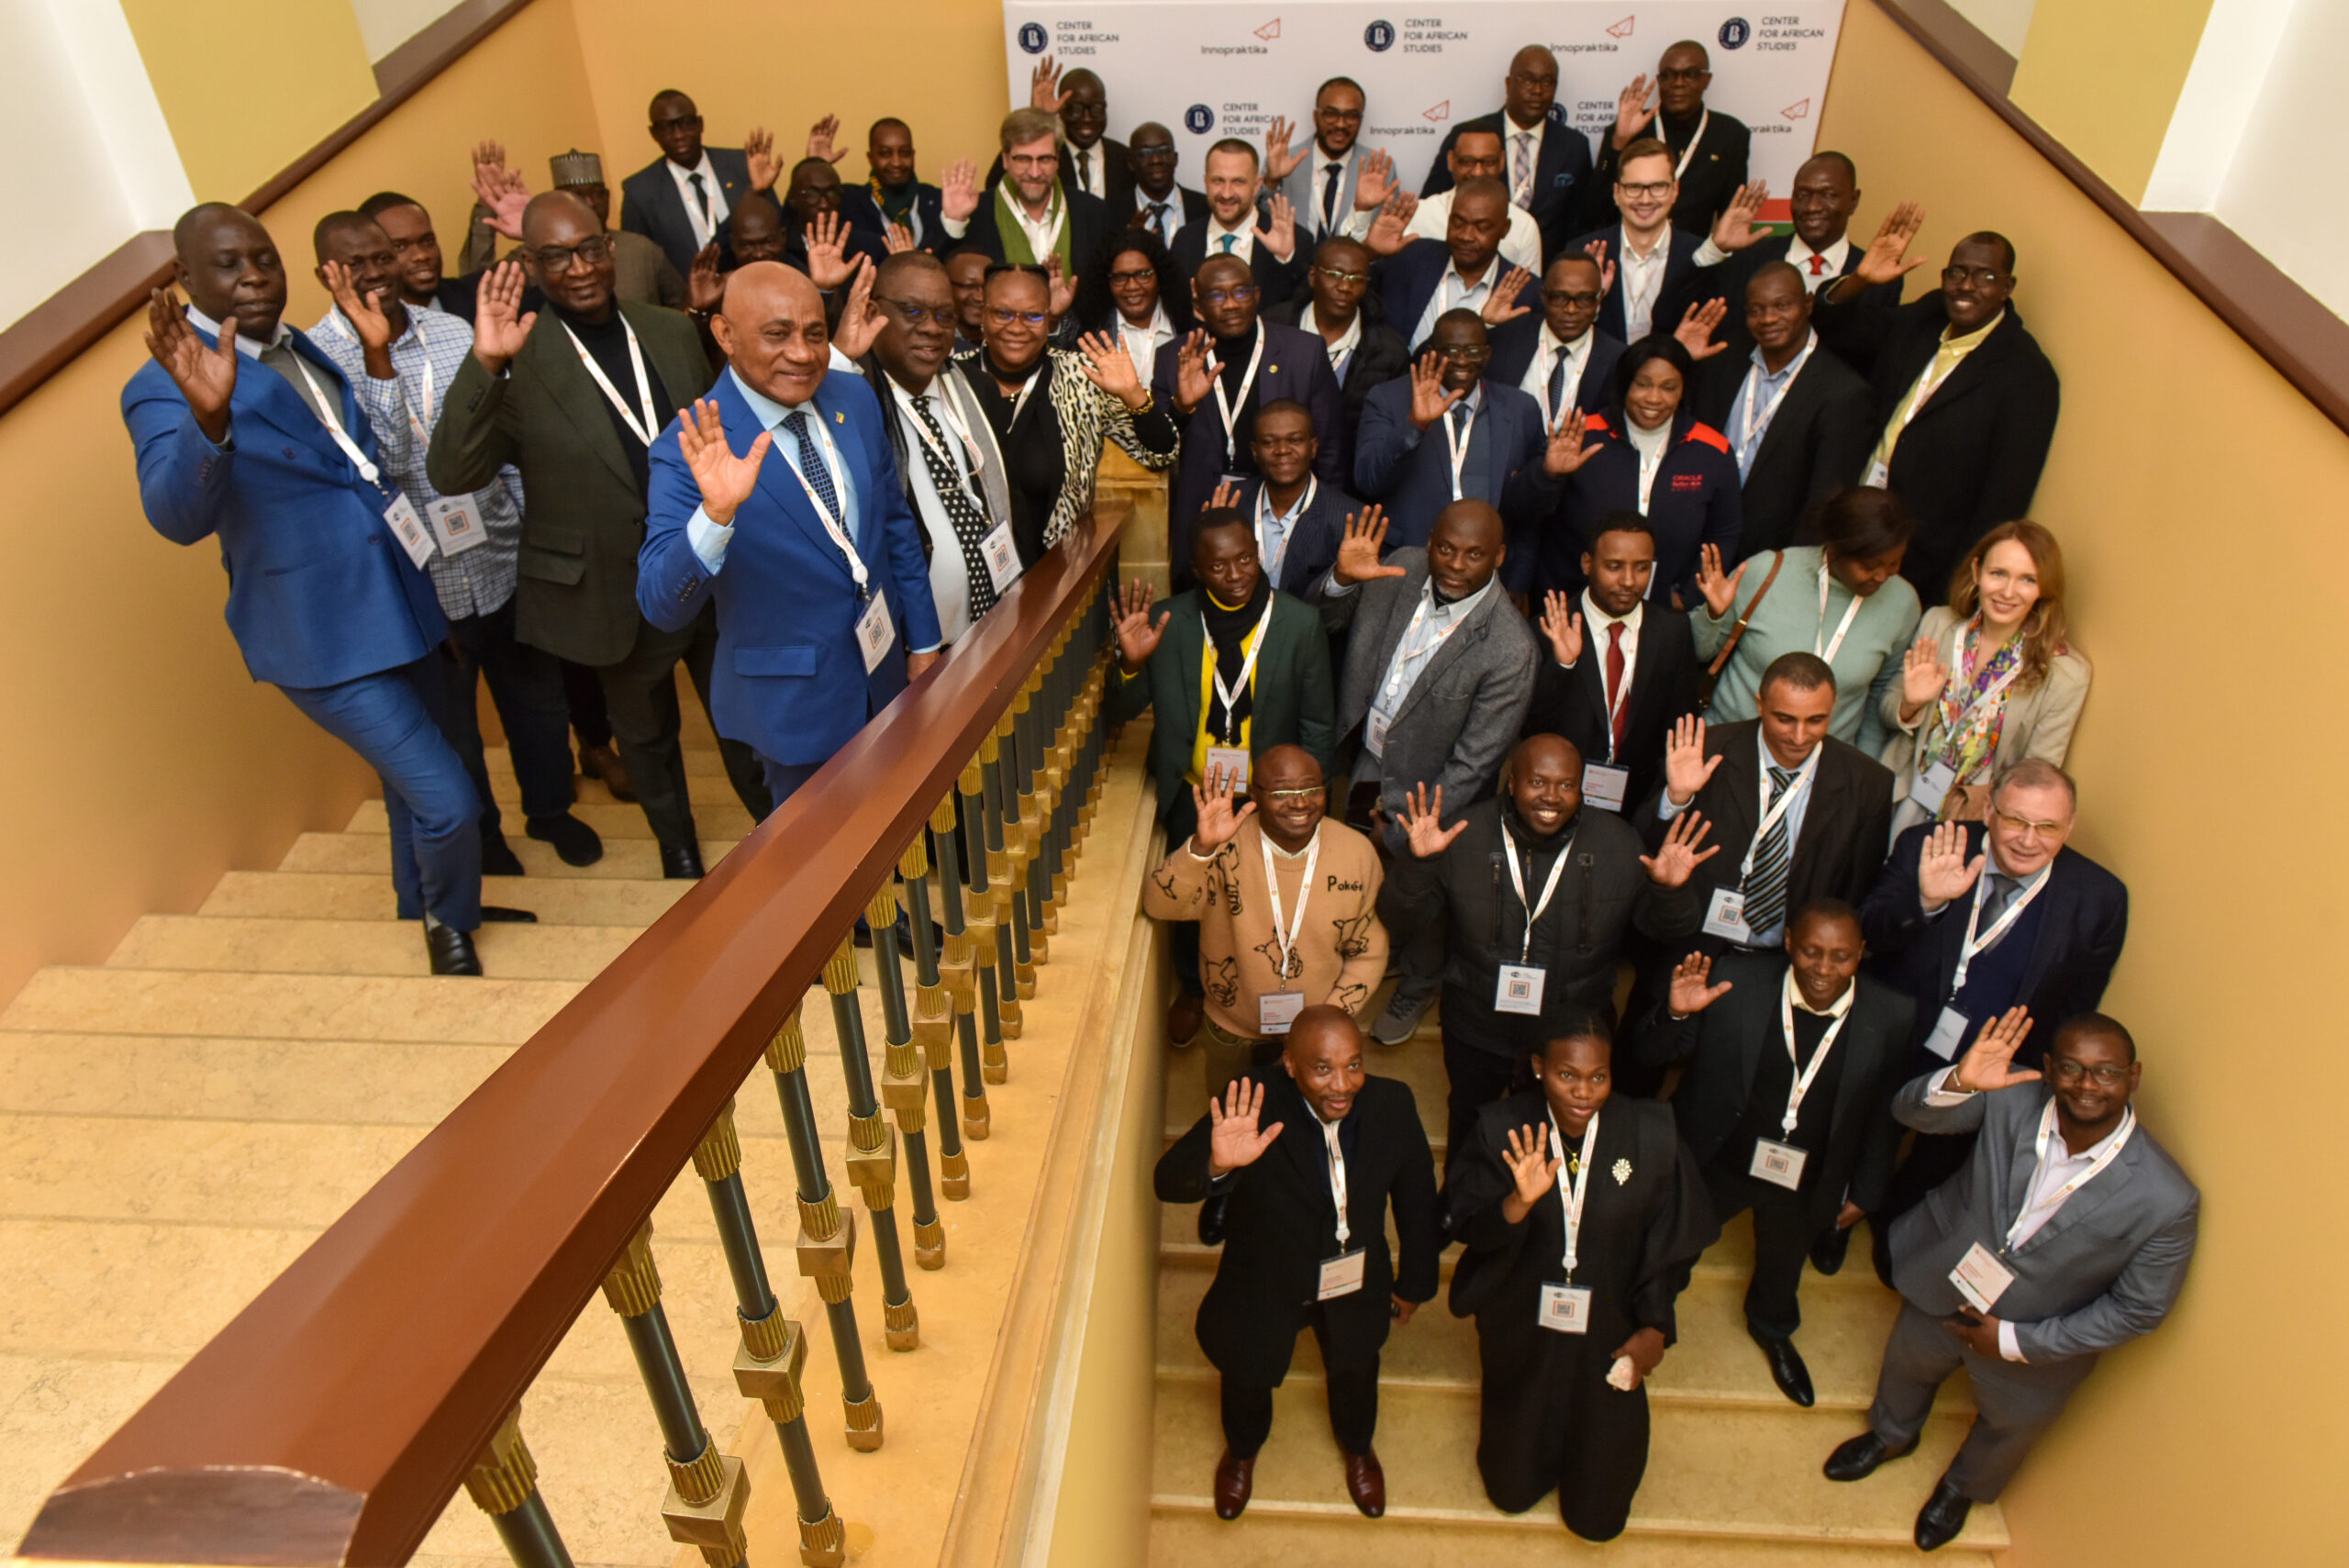 E-Governance Knowledge Sharing Week Connects African Digitalization Leaders